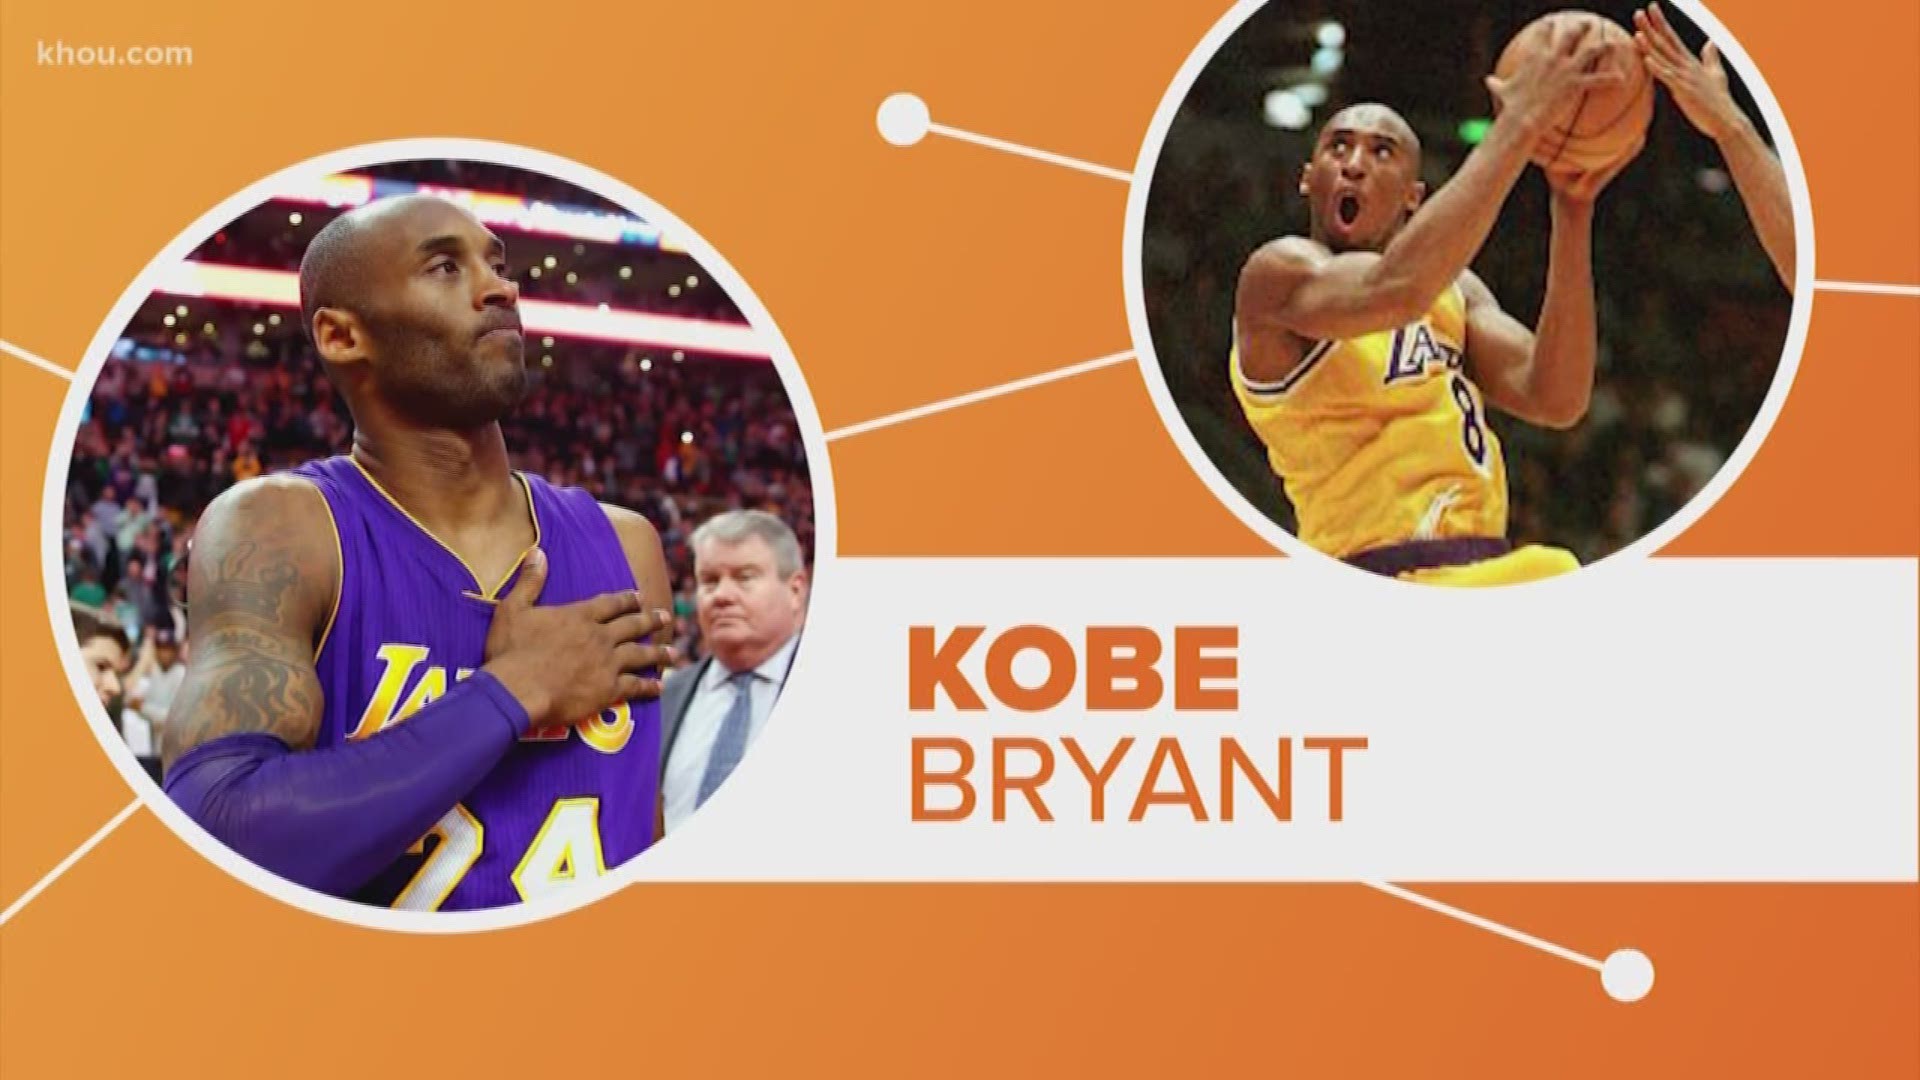 As the world says goodbye to Kobe Bryant, we're remembering his greatest accomplishments. The NBA legend died in a helicopter crash at the age of 41.